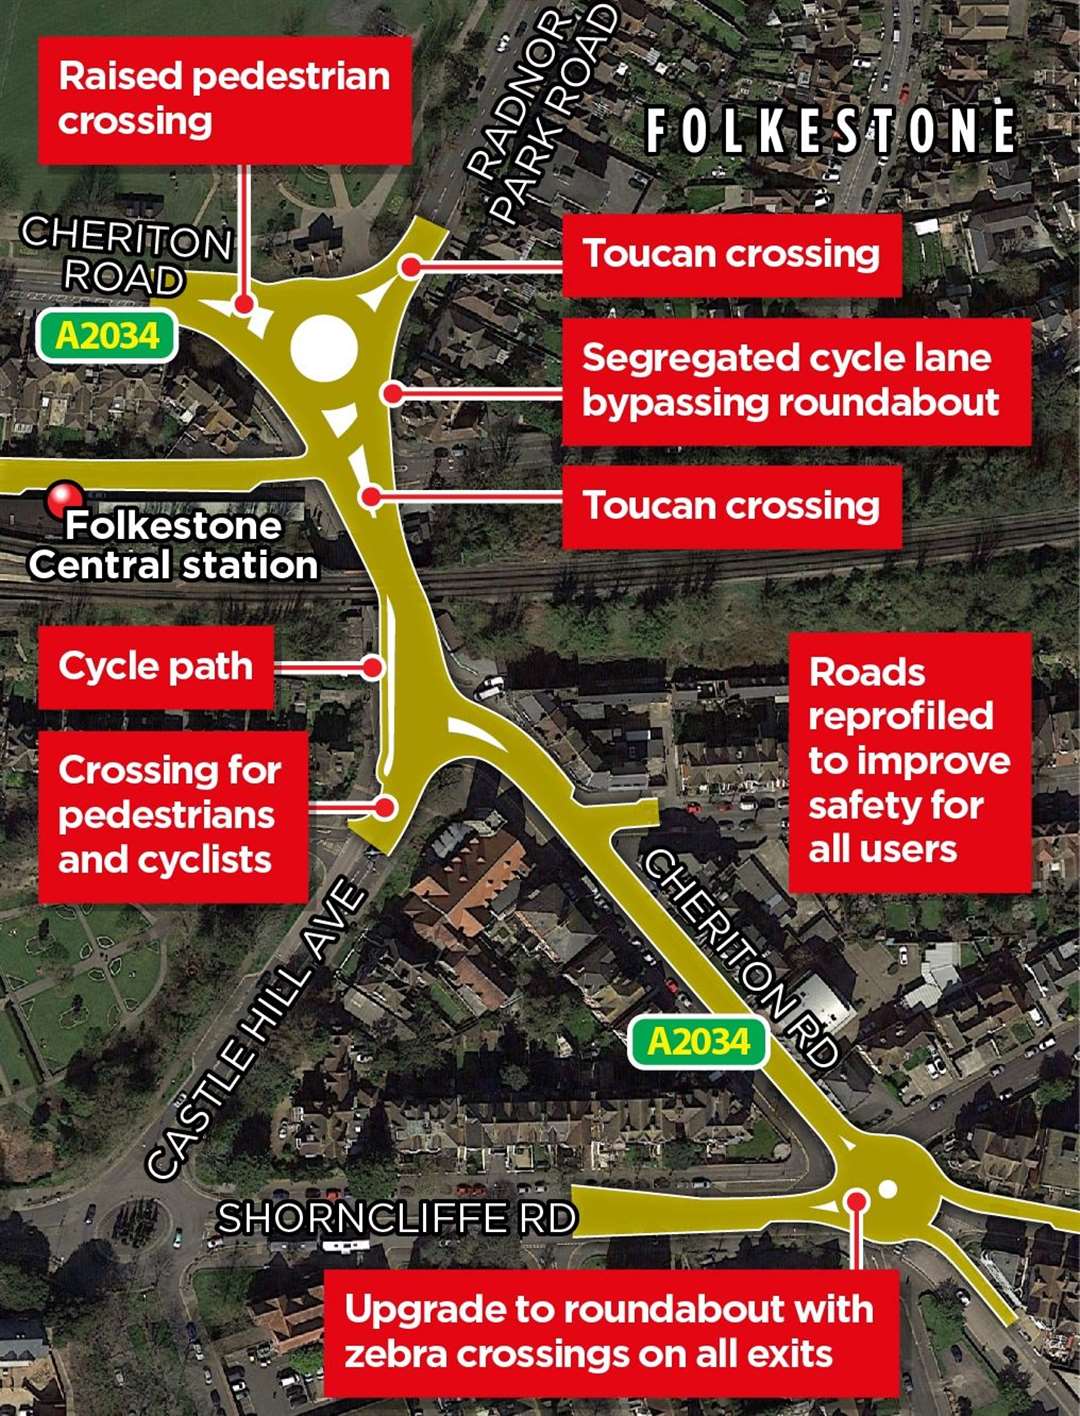 Some of the proposed changes to the road layout between the Radnor Park roundabout and the junction of Cheriton Road and Shorncliffe Road in Folkestone